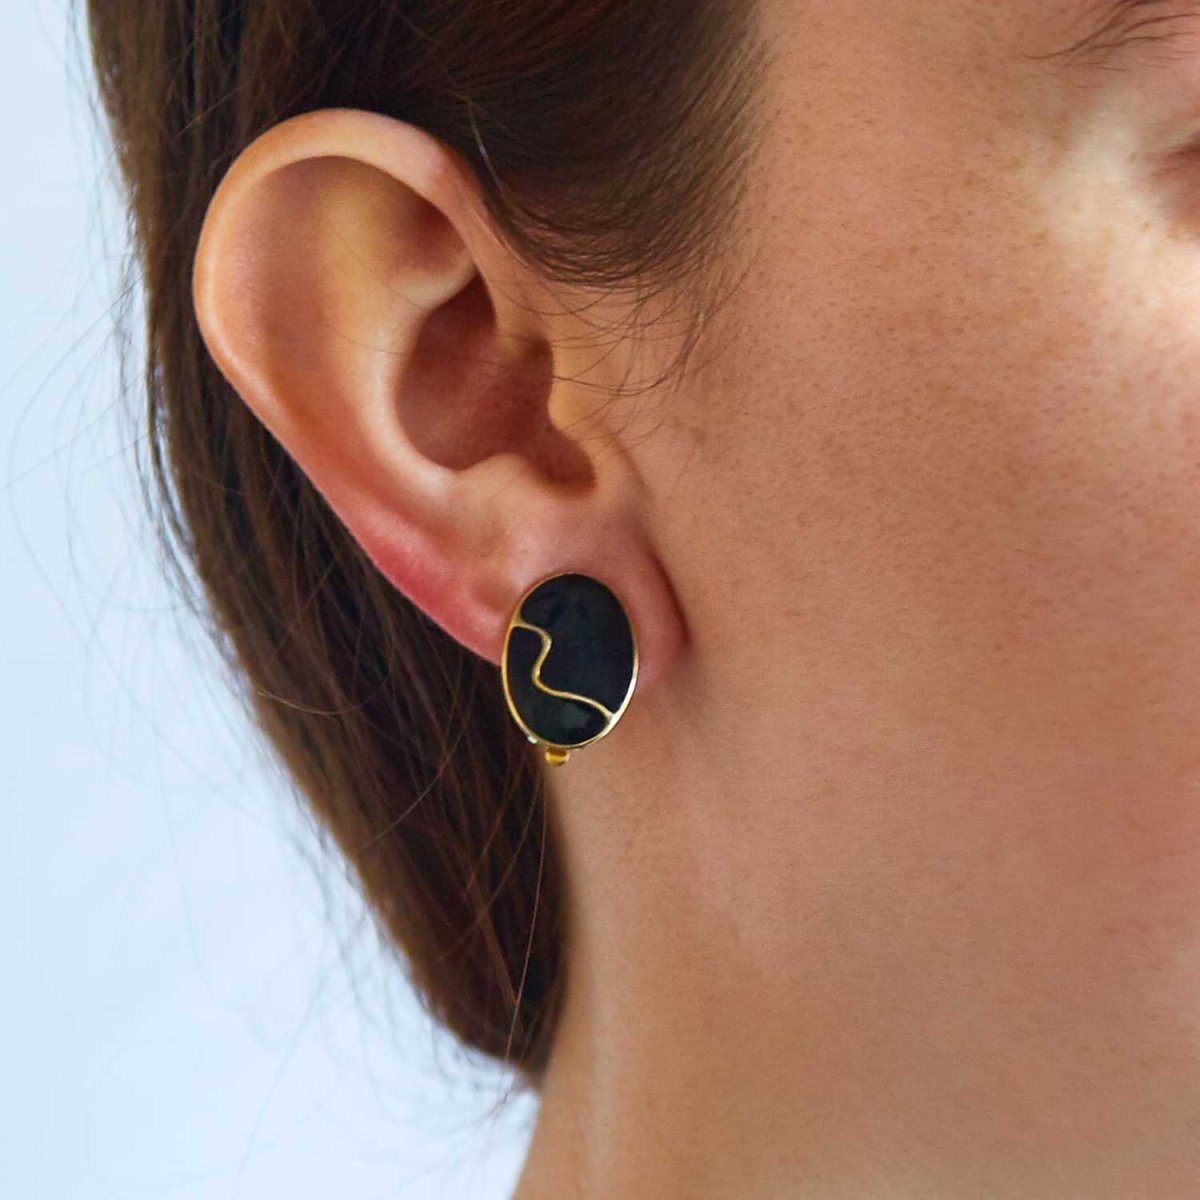 Vintage Black and Gold Minimalist Earrings - Admiral Row